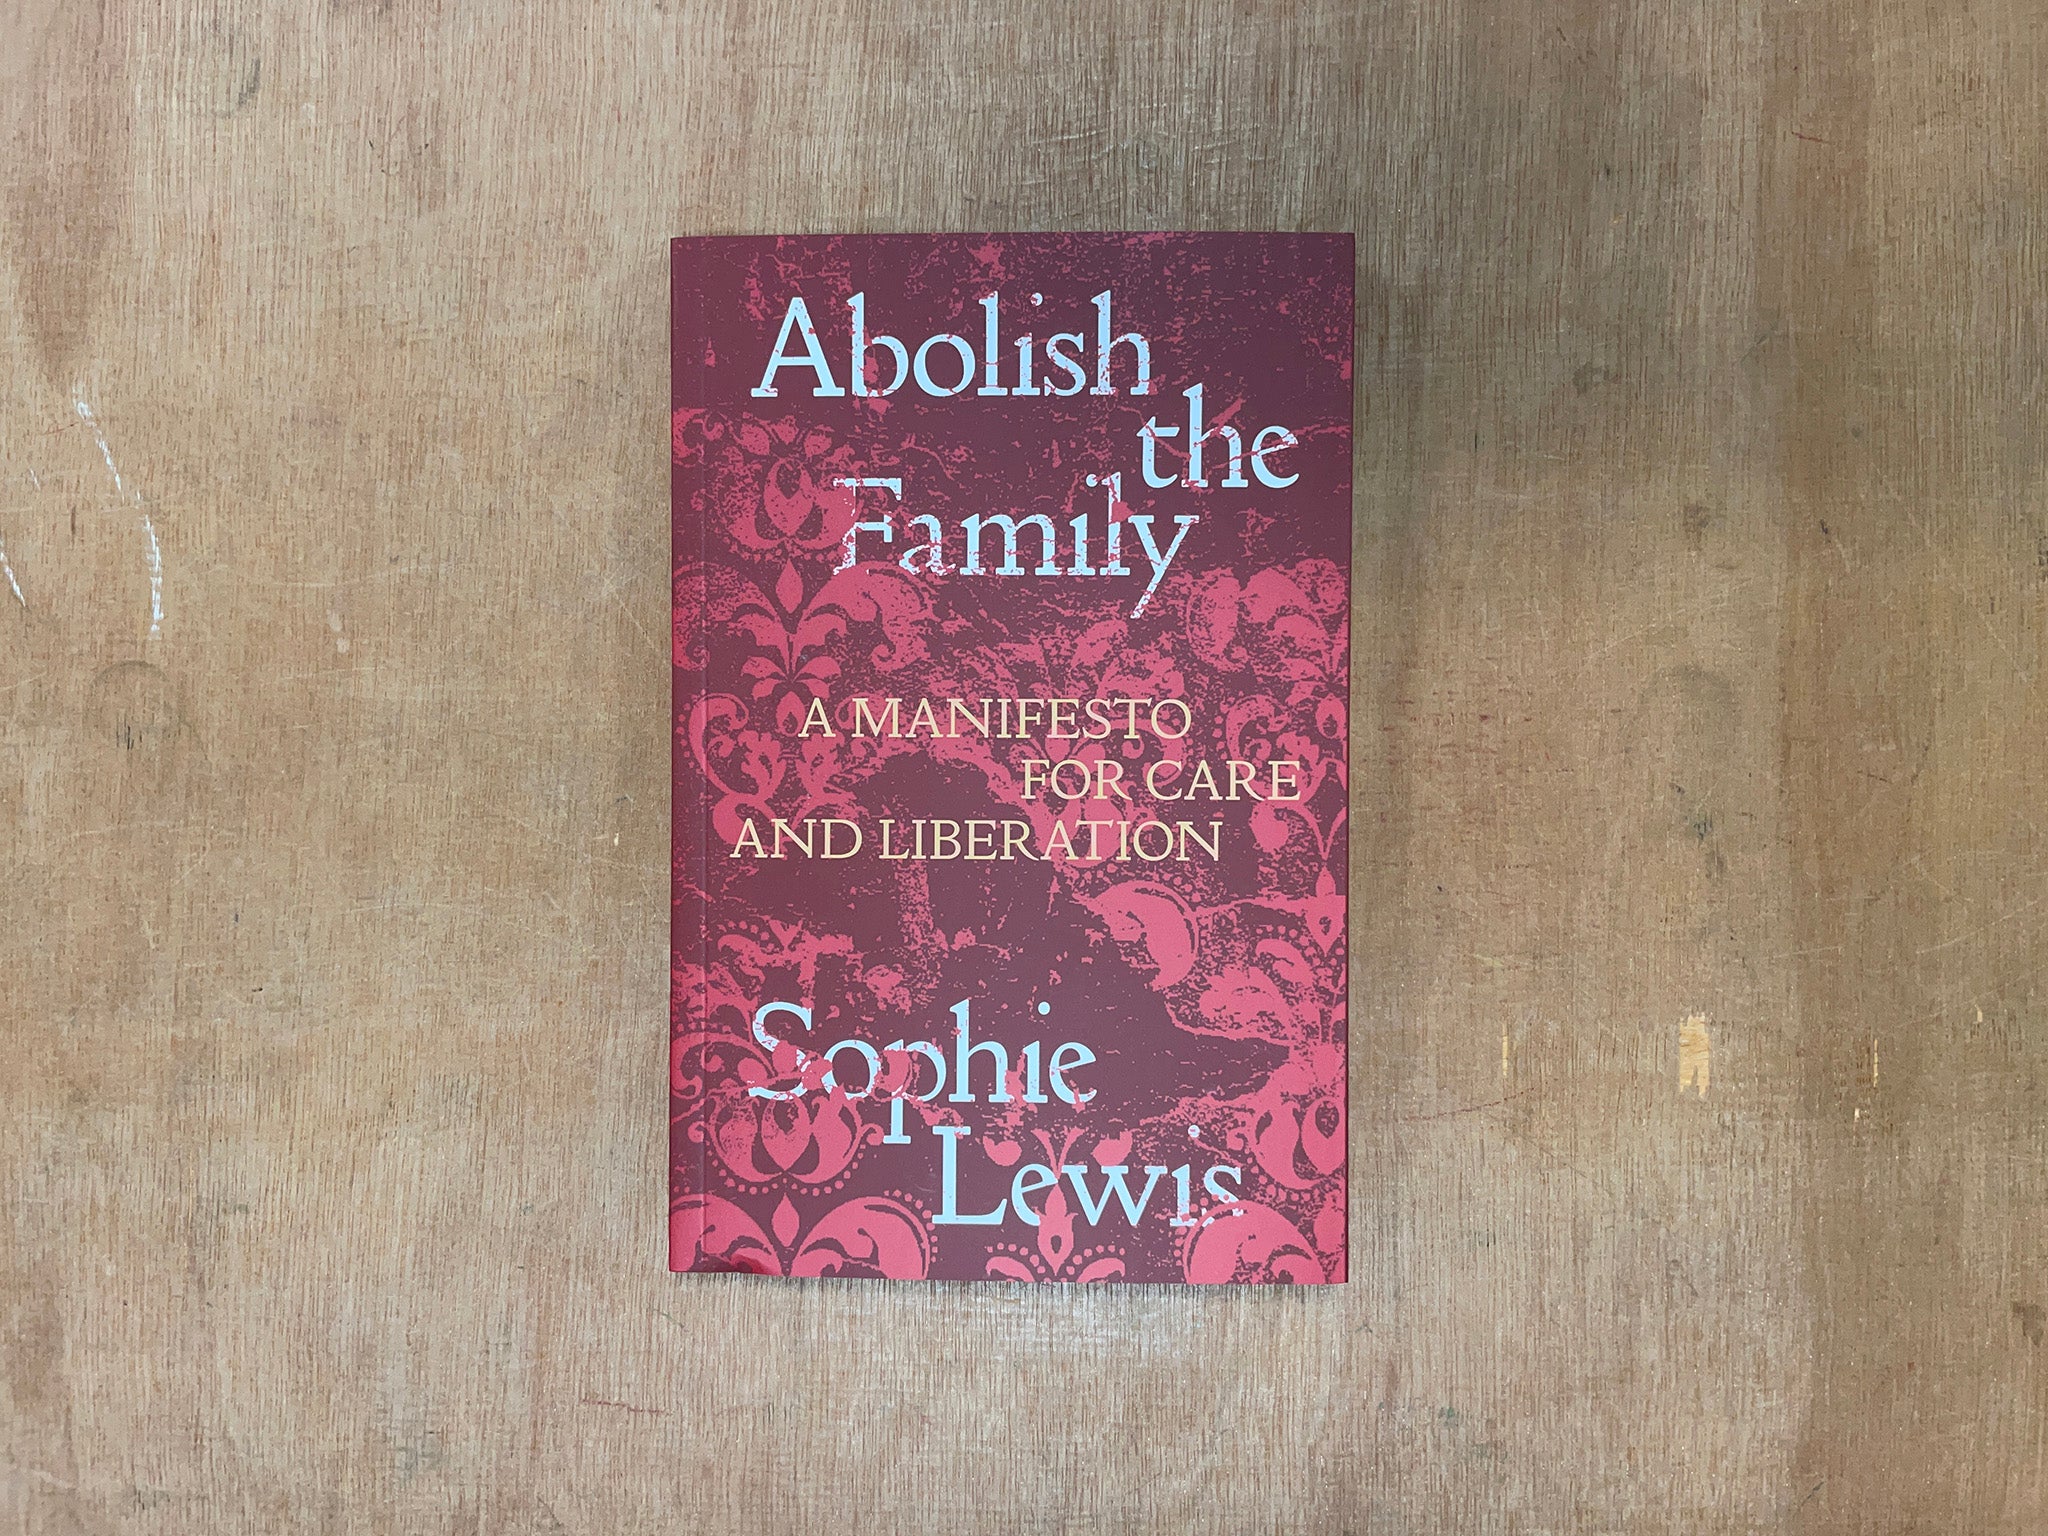 ABOLISH THE FAMILY: A MANIFESTO FOR CARE AND LIBERATION by Sophie Lewis